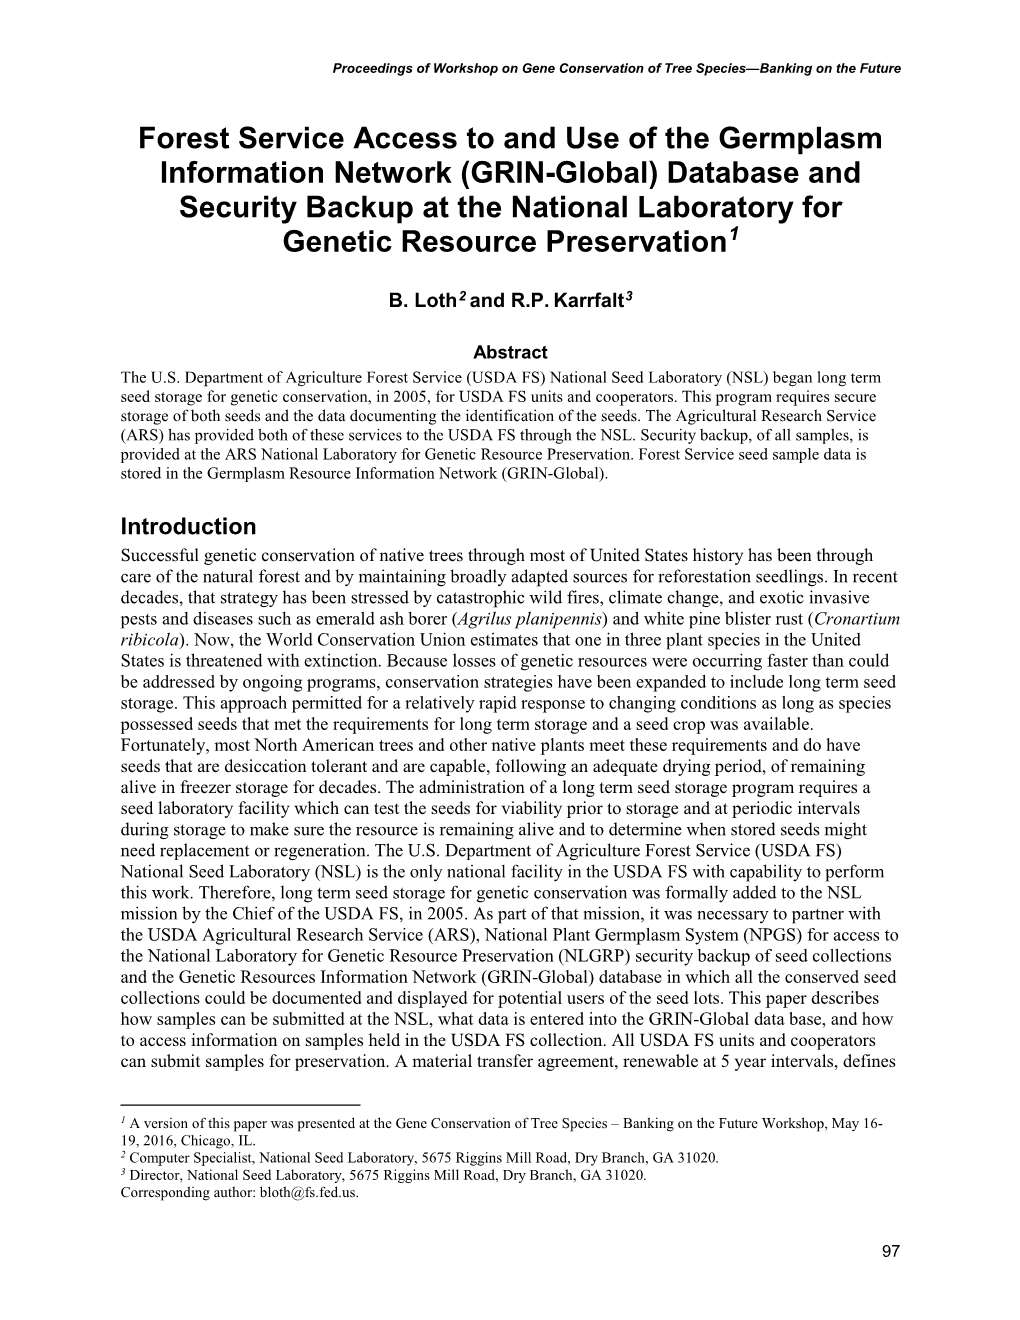 GRIN-Global) Database and Security Backup at the National Laboratory for Genetic Resource Preservation1